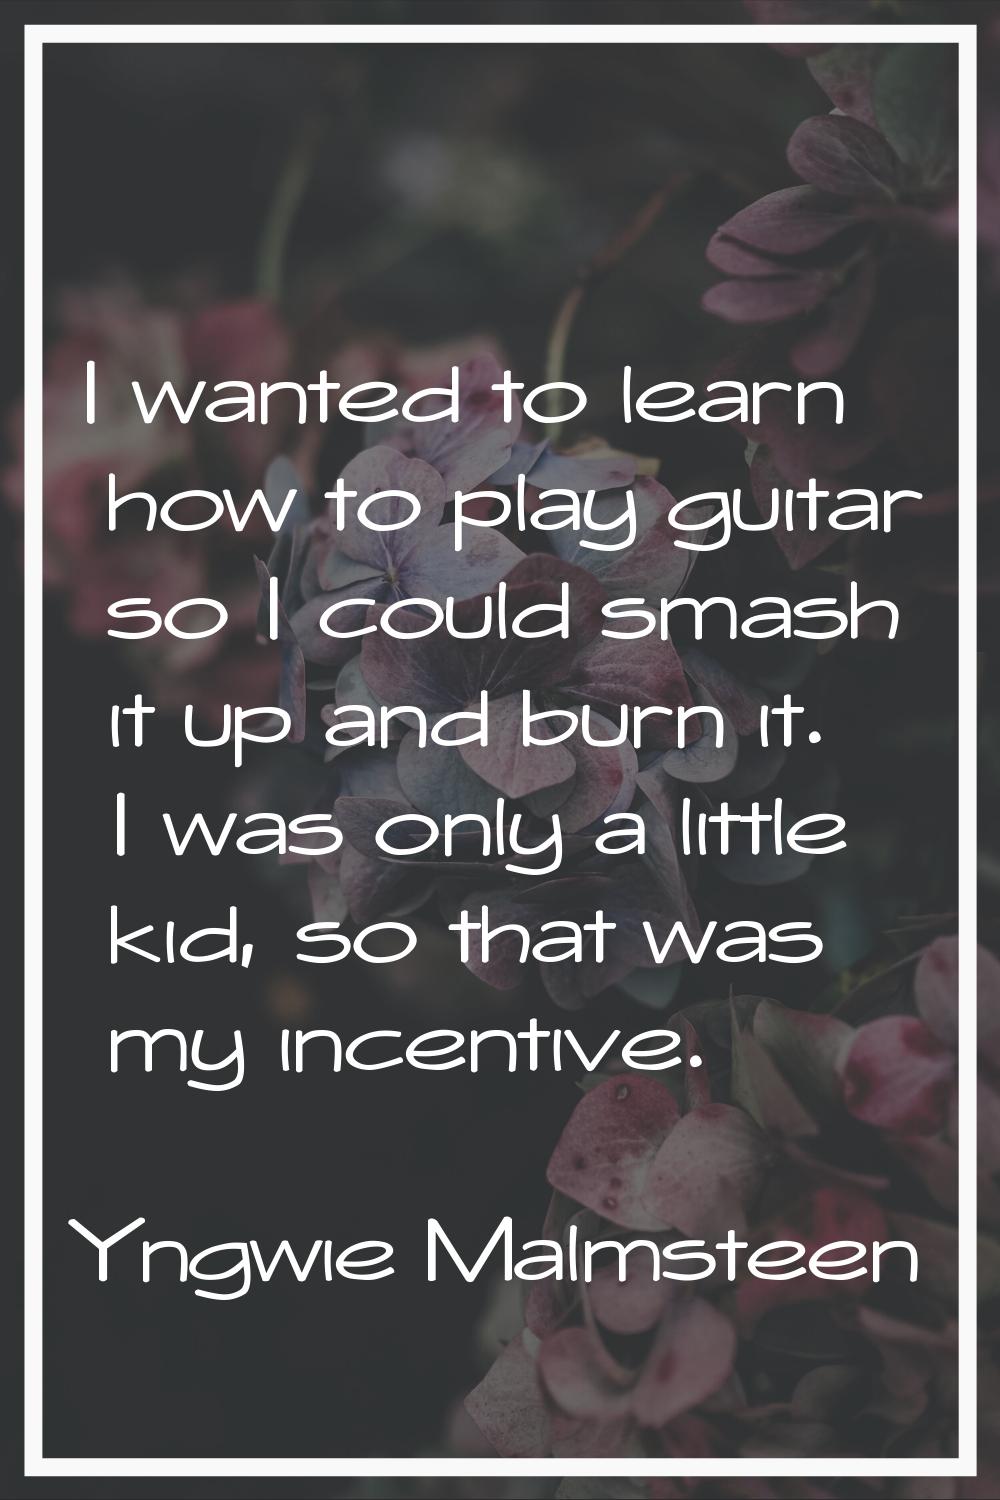 I wanted to learn how to play guitar so I could smash it up and burn it. I was only a little kid, s